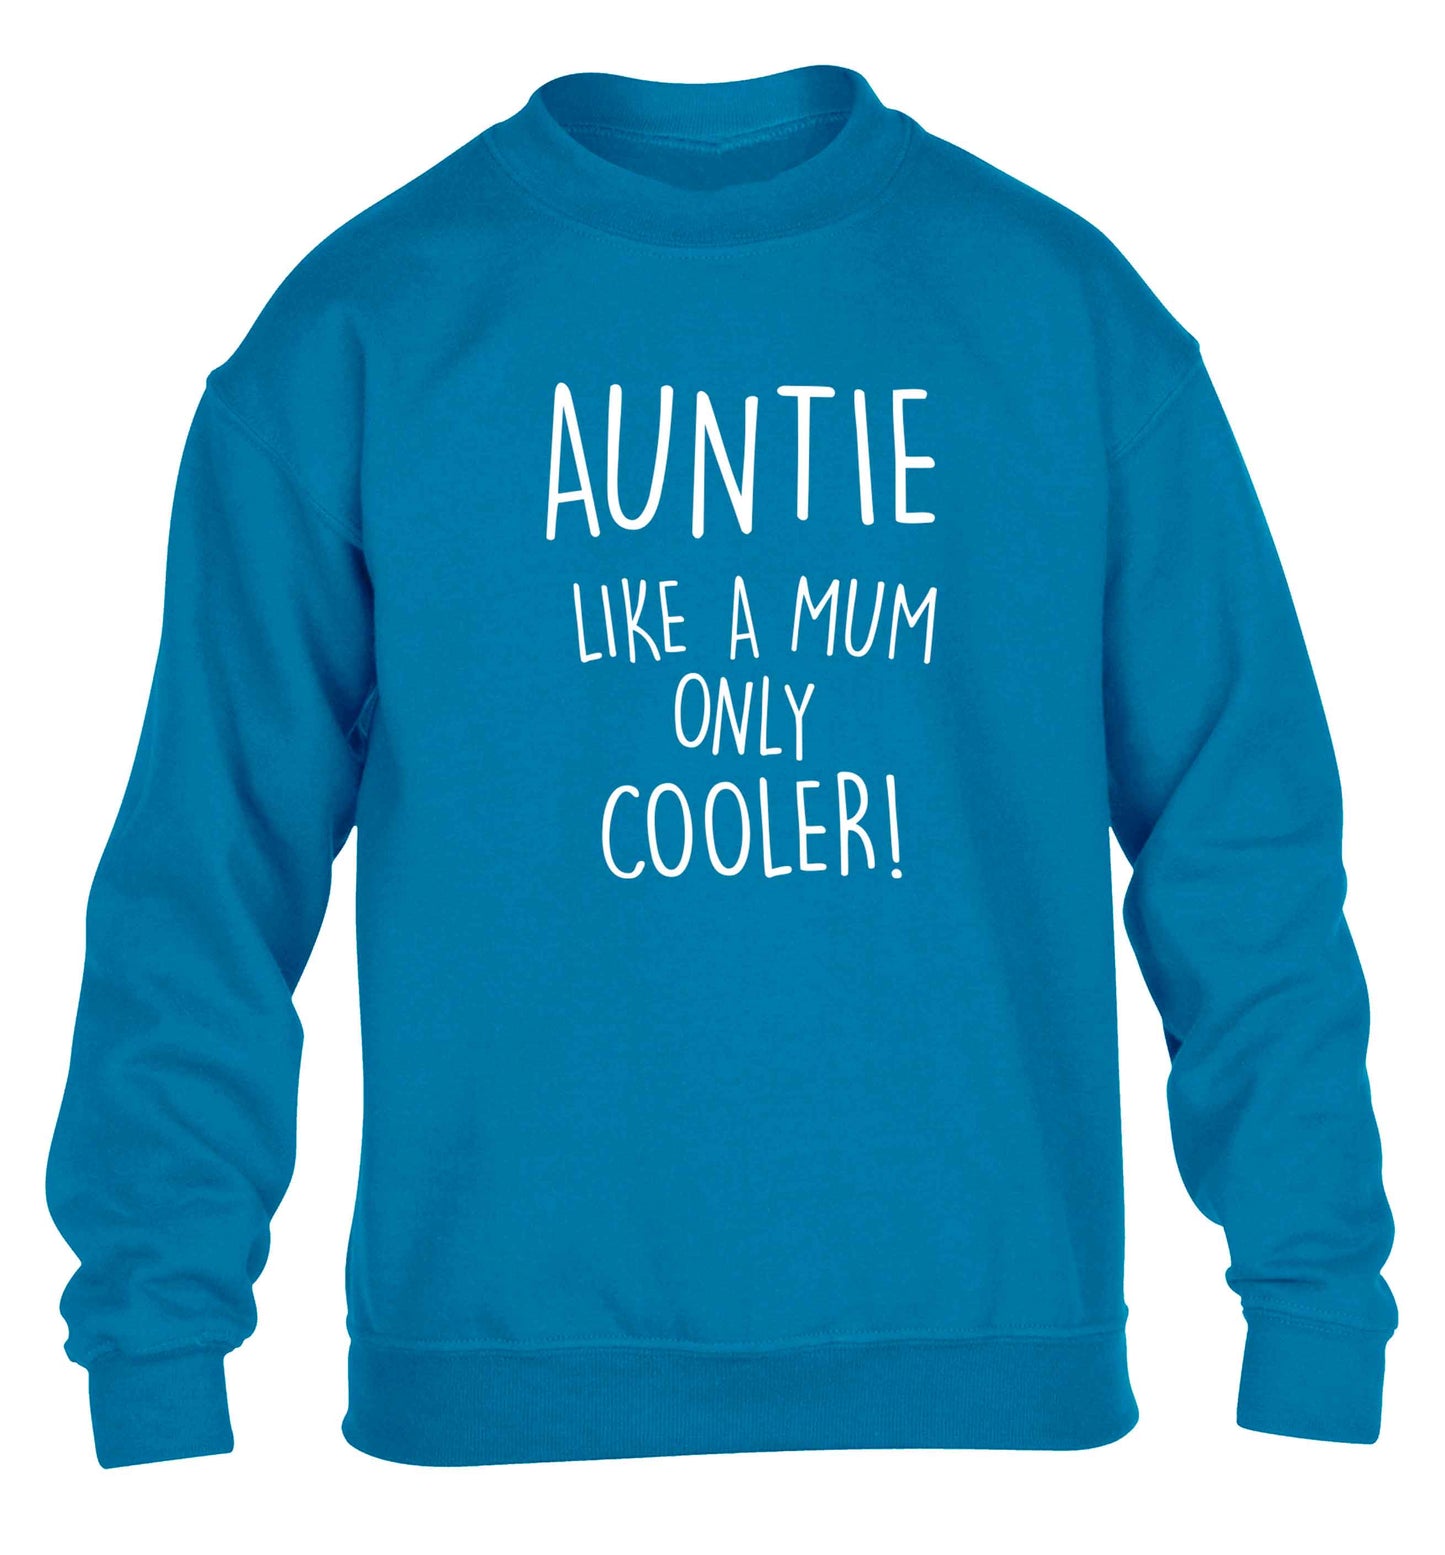 Auntie like a mum only cooler children's blue sweater 12-13 Years